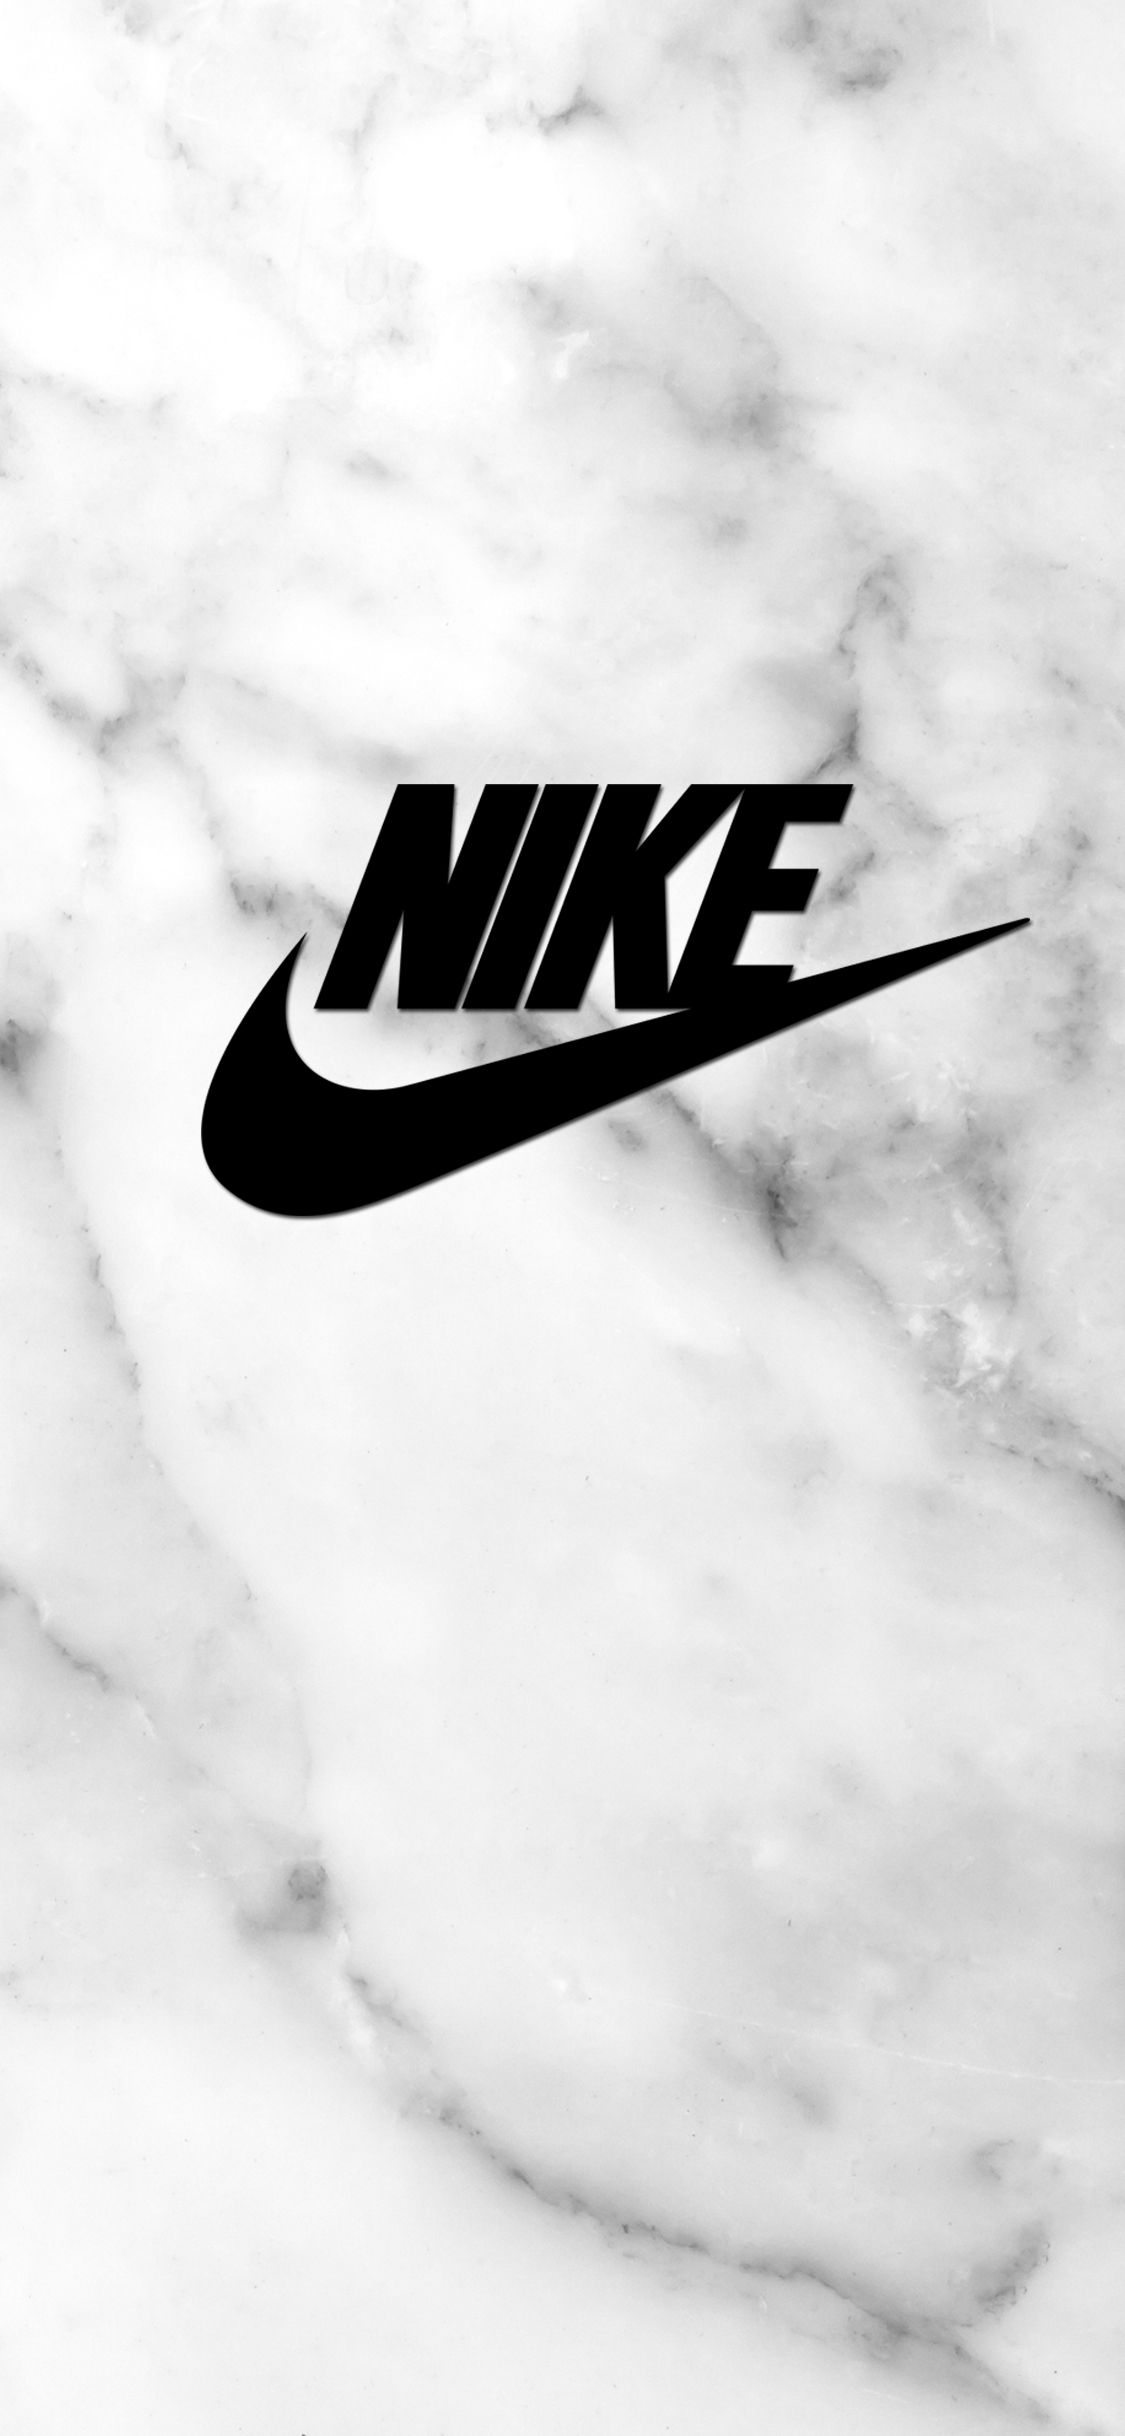  Nike Coole Hintergrundbild 1125x2436. Nike iPhone X wallpaper. You can order iphone case with this picture. Just click on picture :). Nike wallpaper, Nike wallpaper iphone, Motorola wallpaper